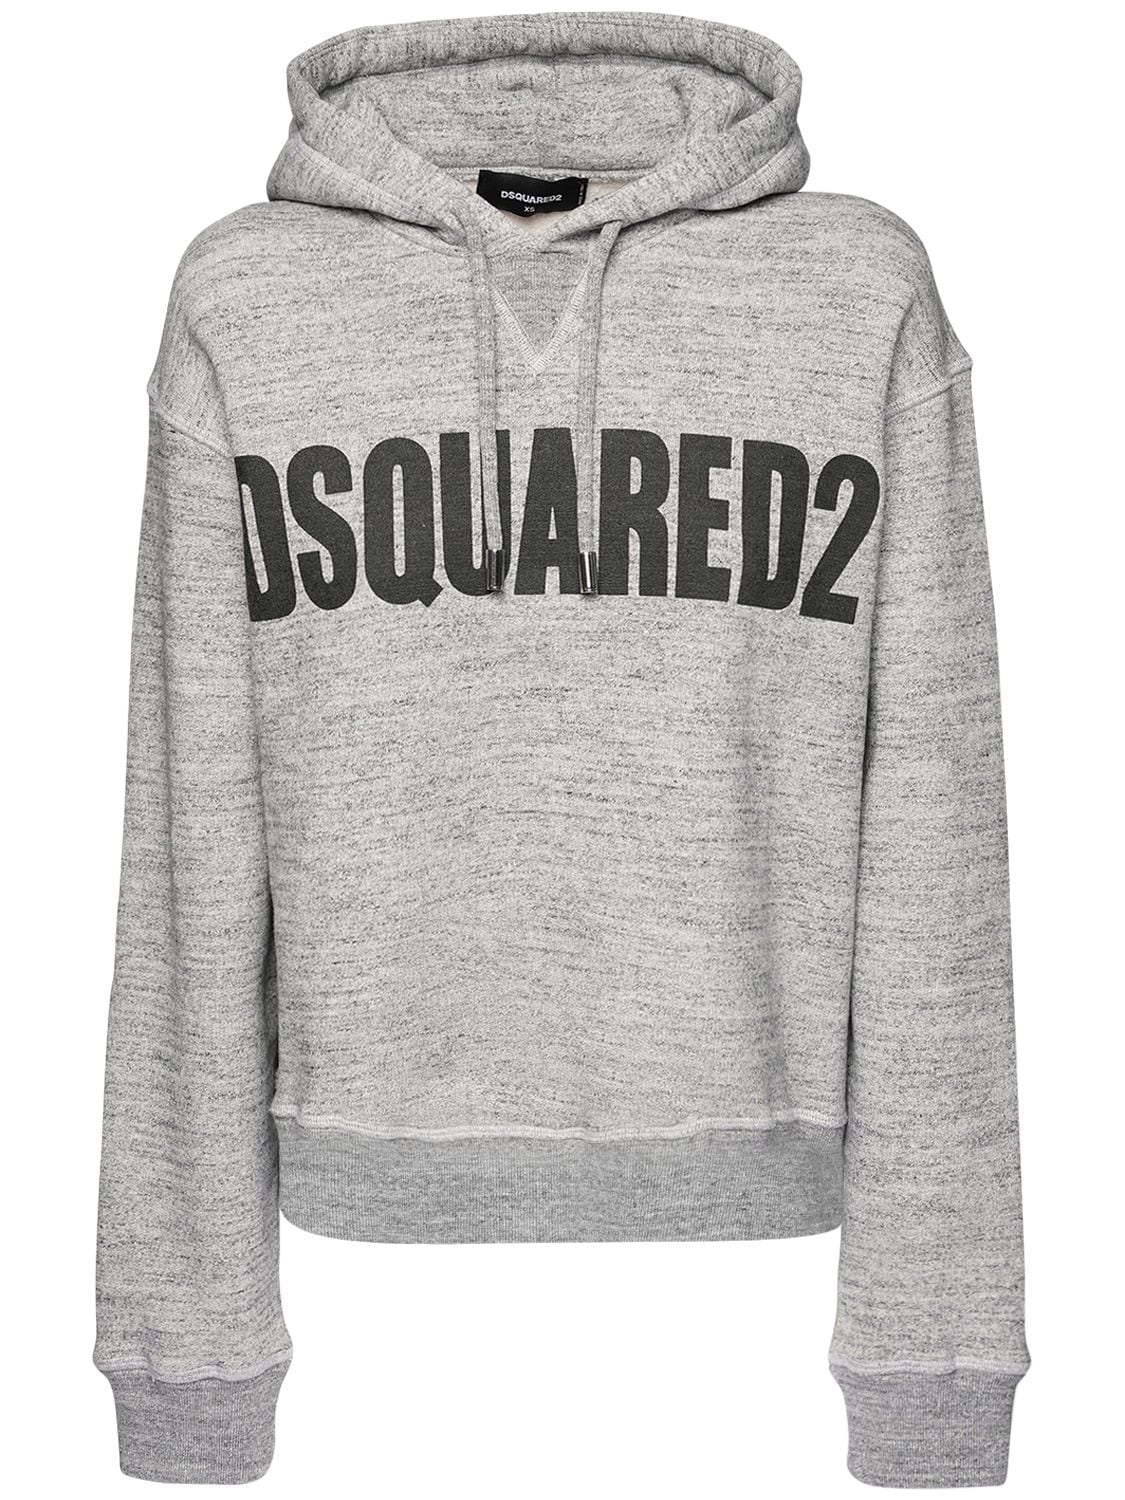 DSQUARED2 COOL FIT LOGO COTTON JERSEY HOODIE,72IAGF044-OTYY0